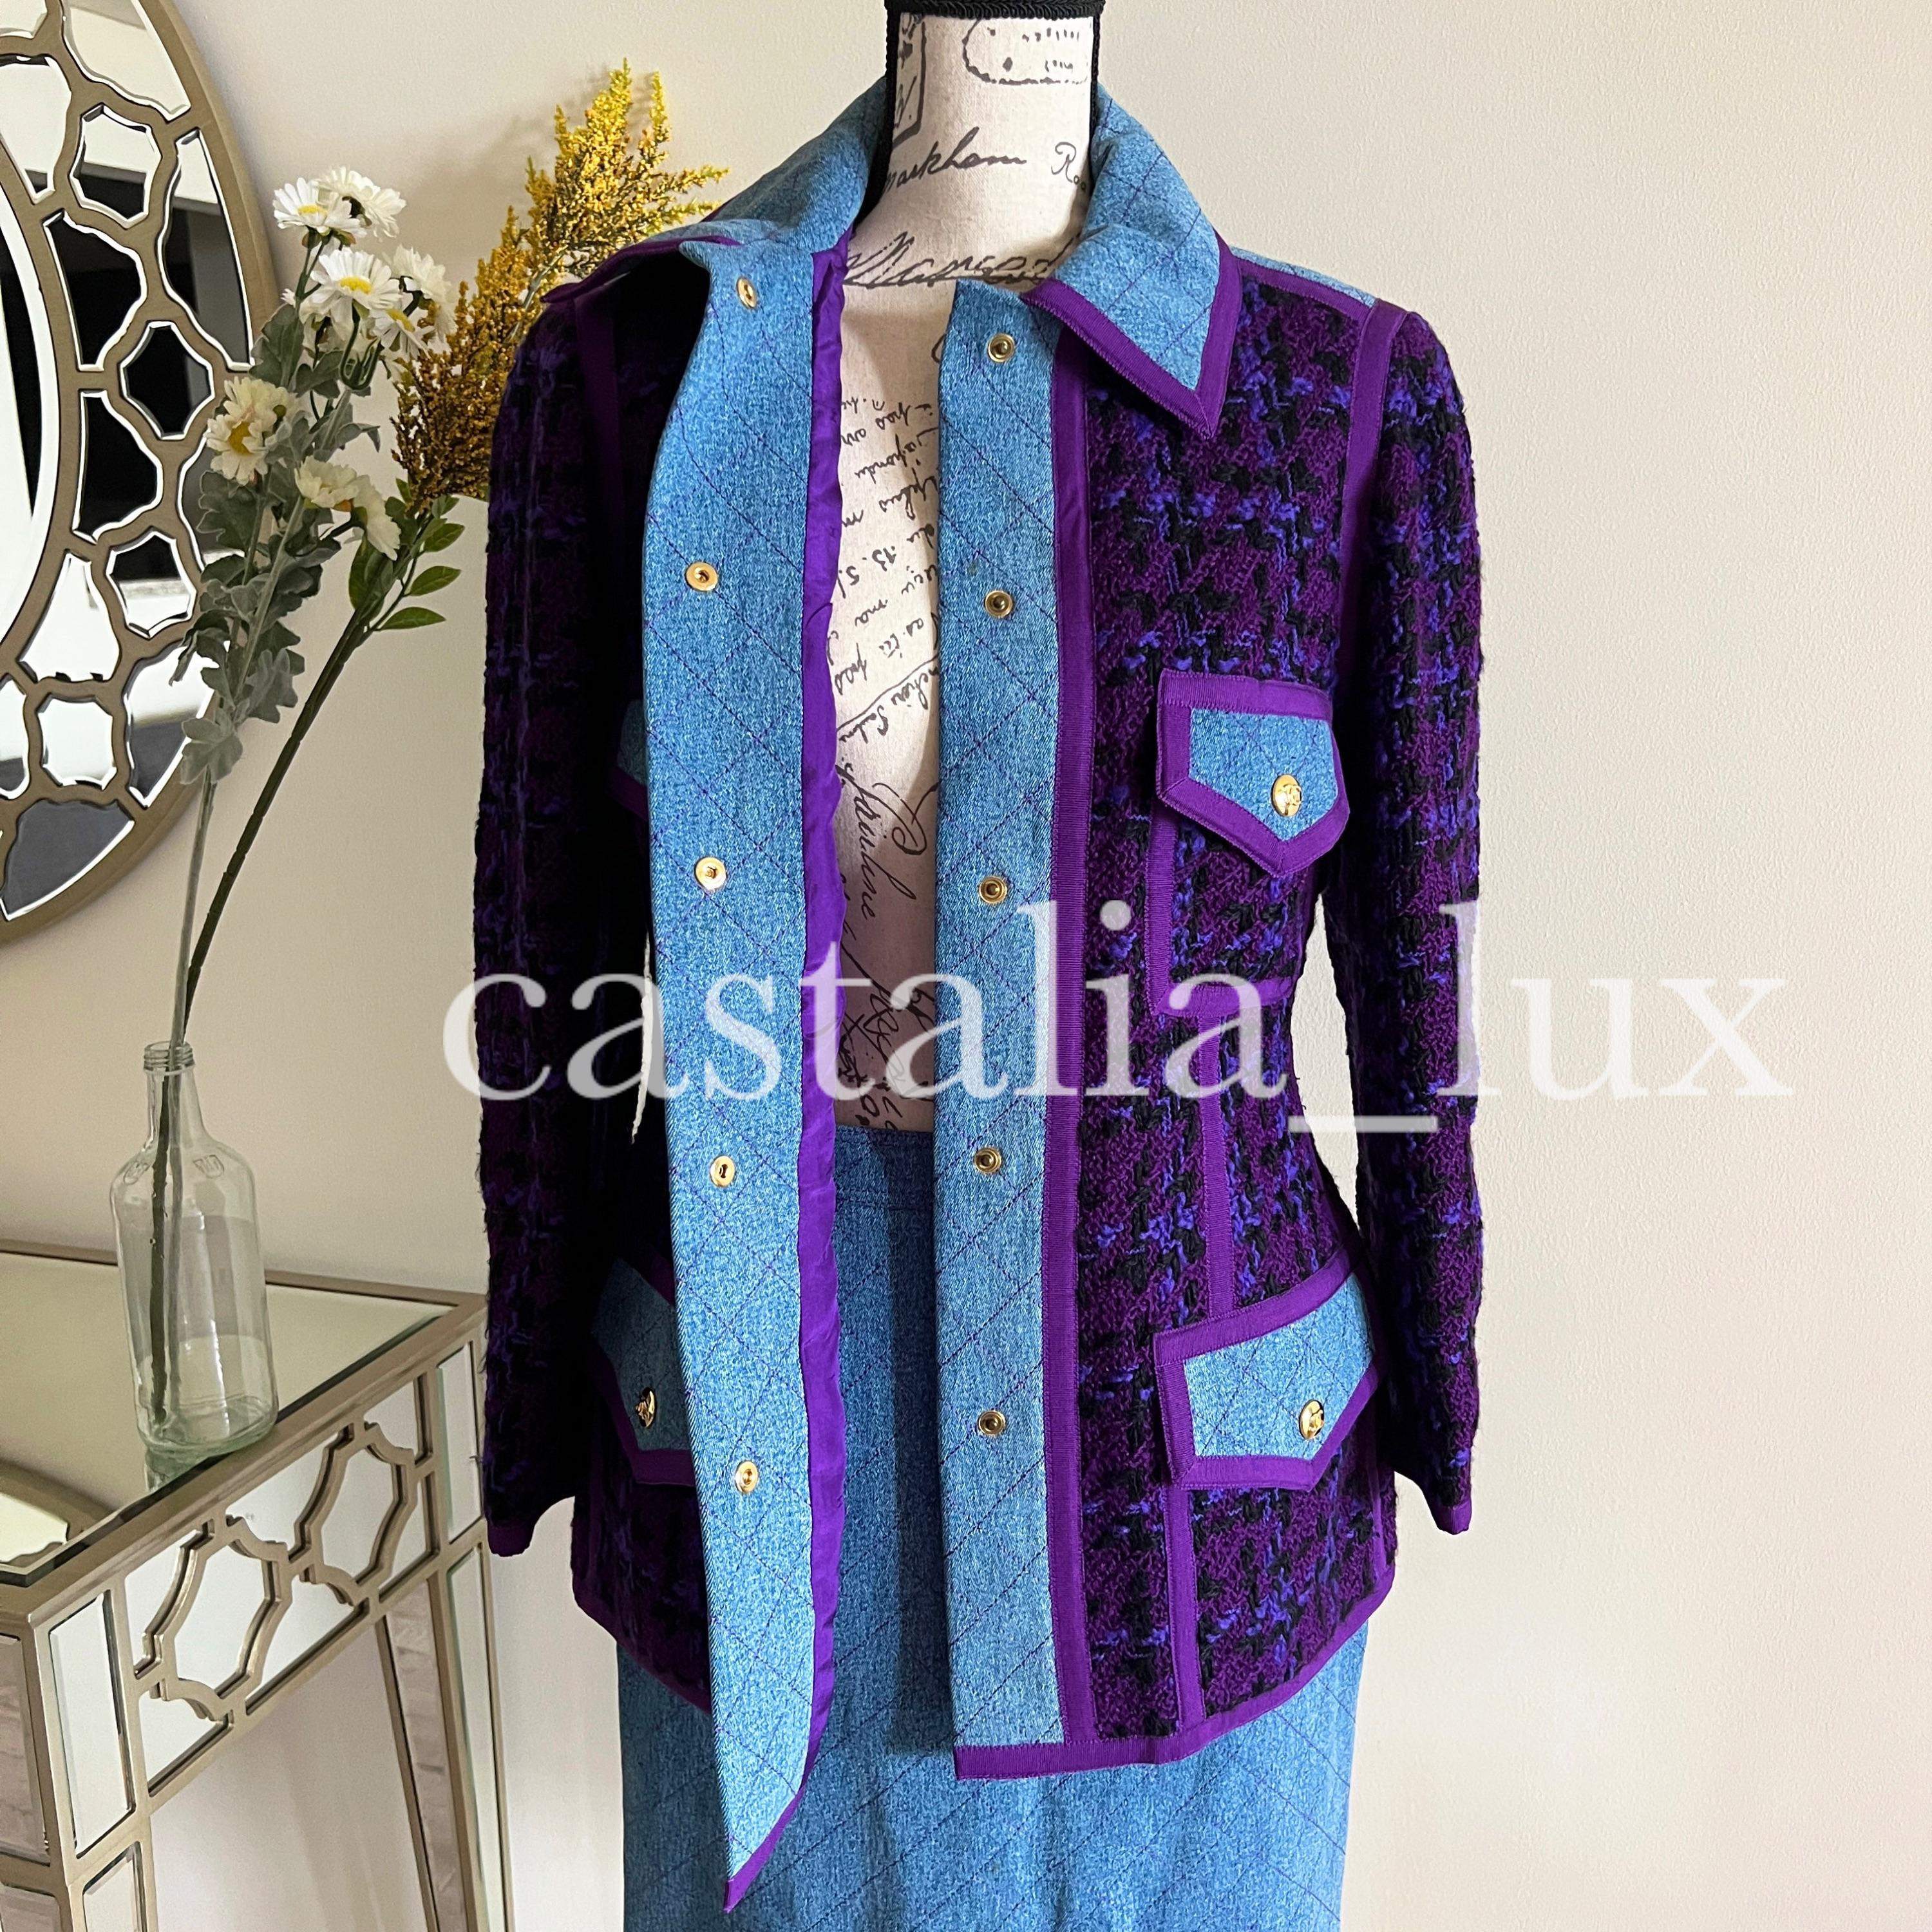 Chanel Rare 1991 Supermodels Tweed and Denim Suit For Sale 10